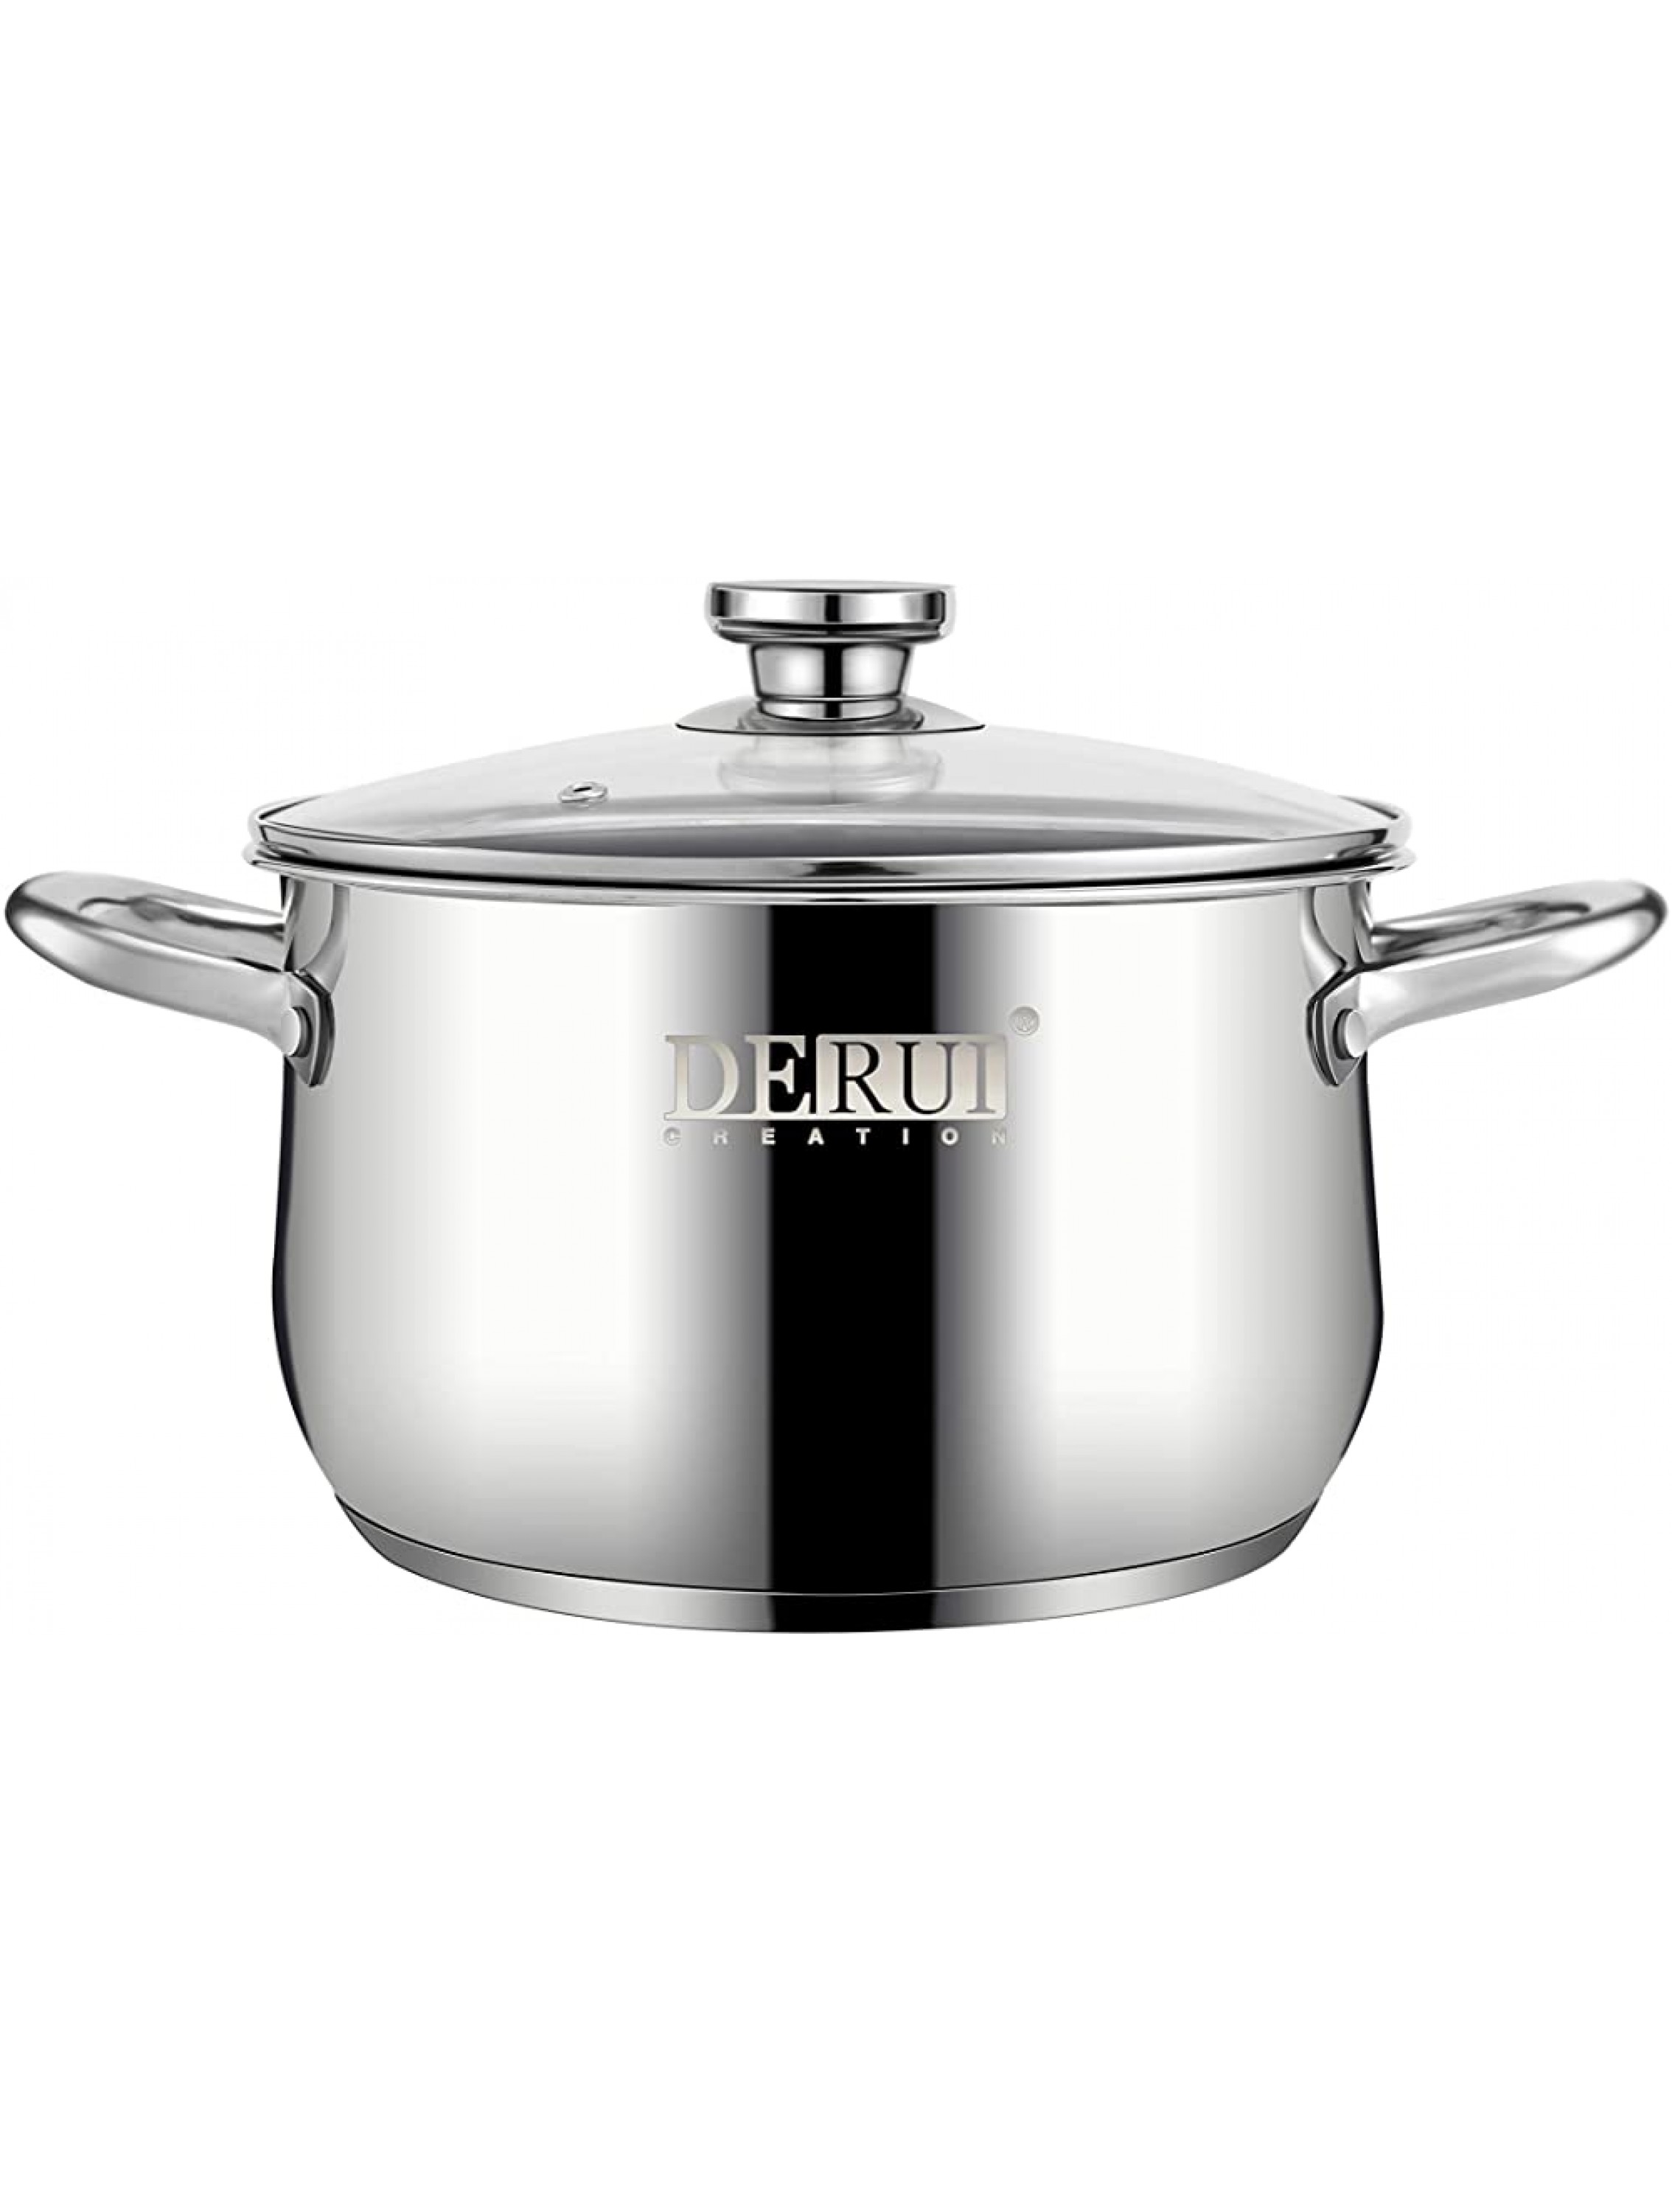 Nonstick Stock Pots,5 QT Stainless Steel Saucepot with Glass Lid Silver Anti-scalding Handle Stockpot By DERUI CREATION 5QT9.45”x6.10” Silver - B3CB54D52